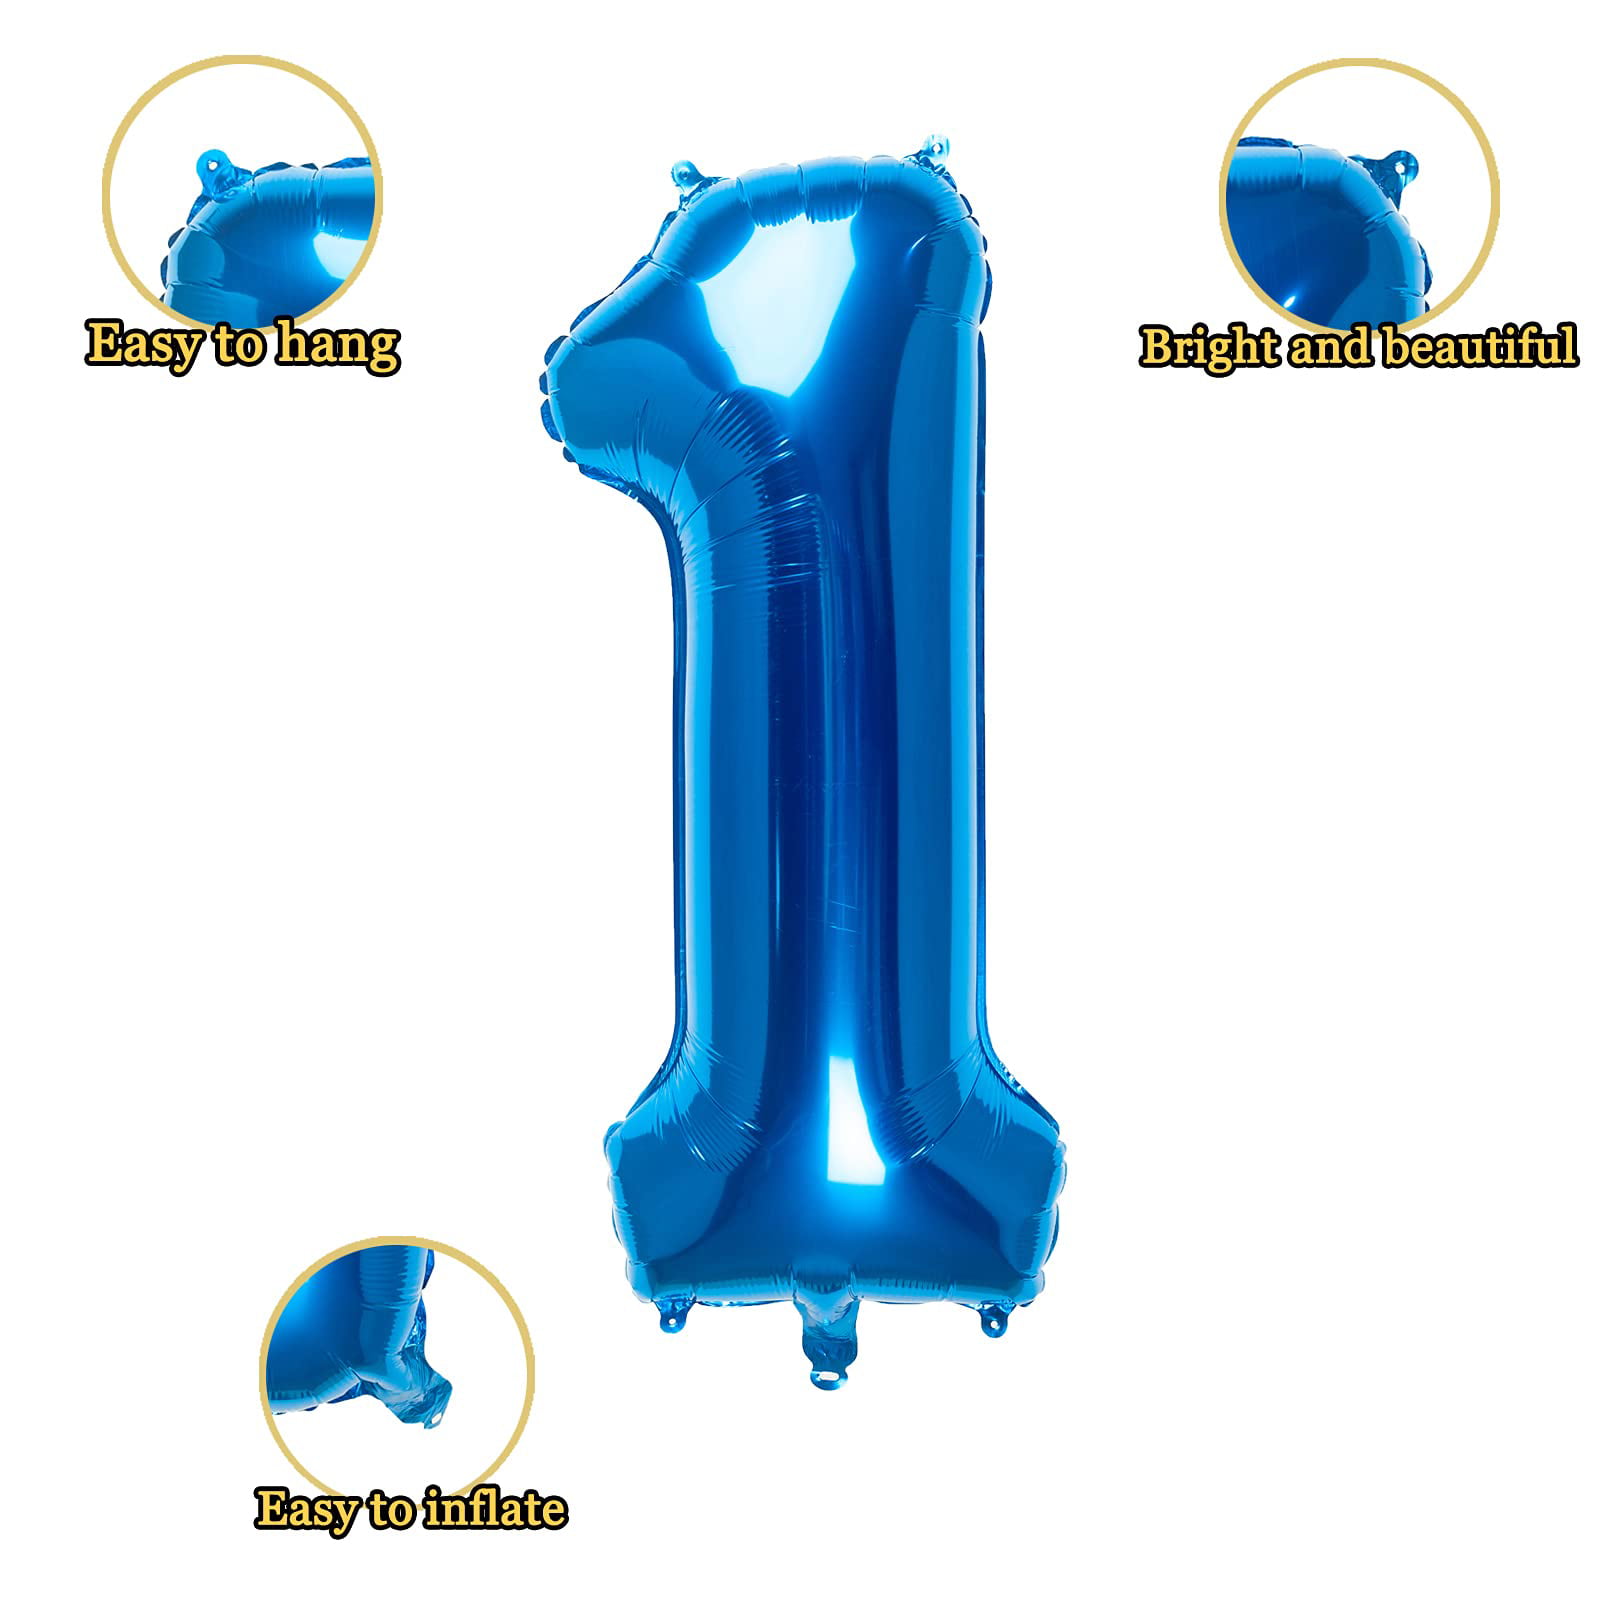 32 Inch Blue Number 1 Balloons Foil Ballon Digital Birthday Party Decoration Supplies (Blue Number 1 Balloon) pic